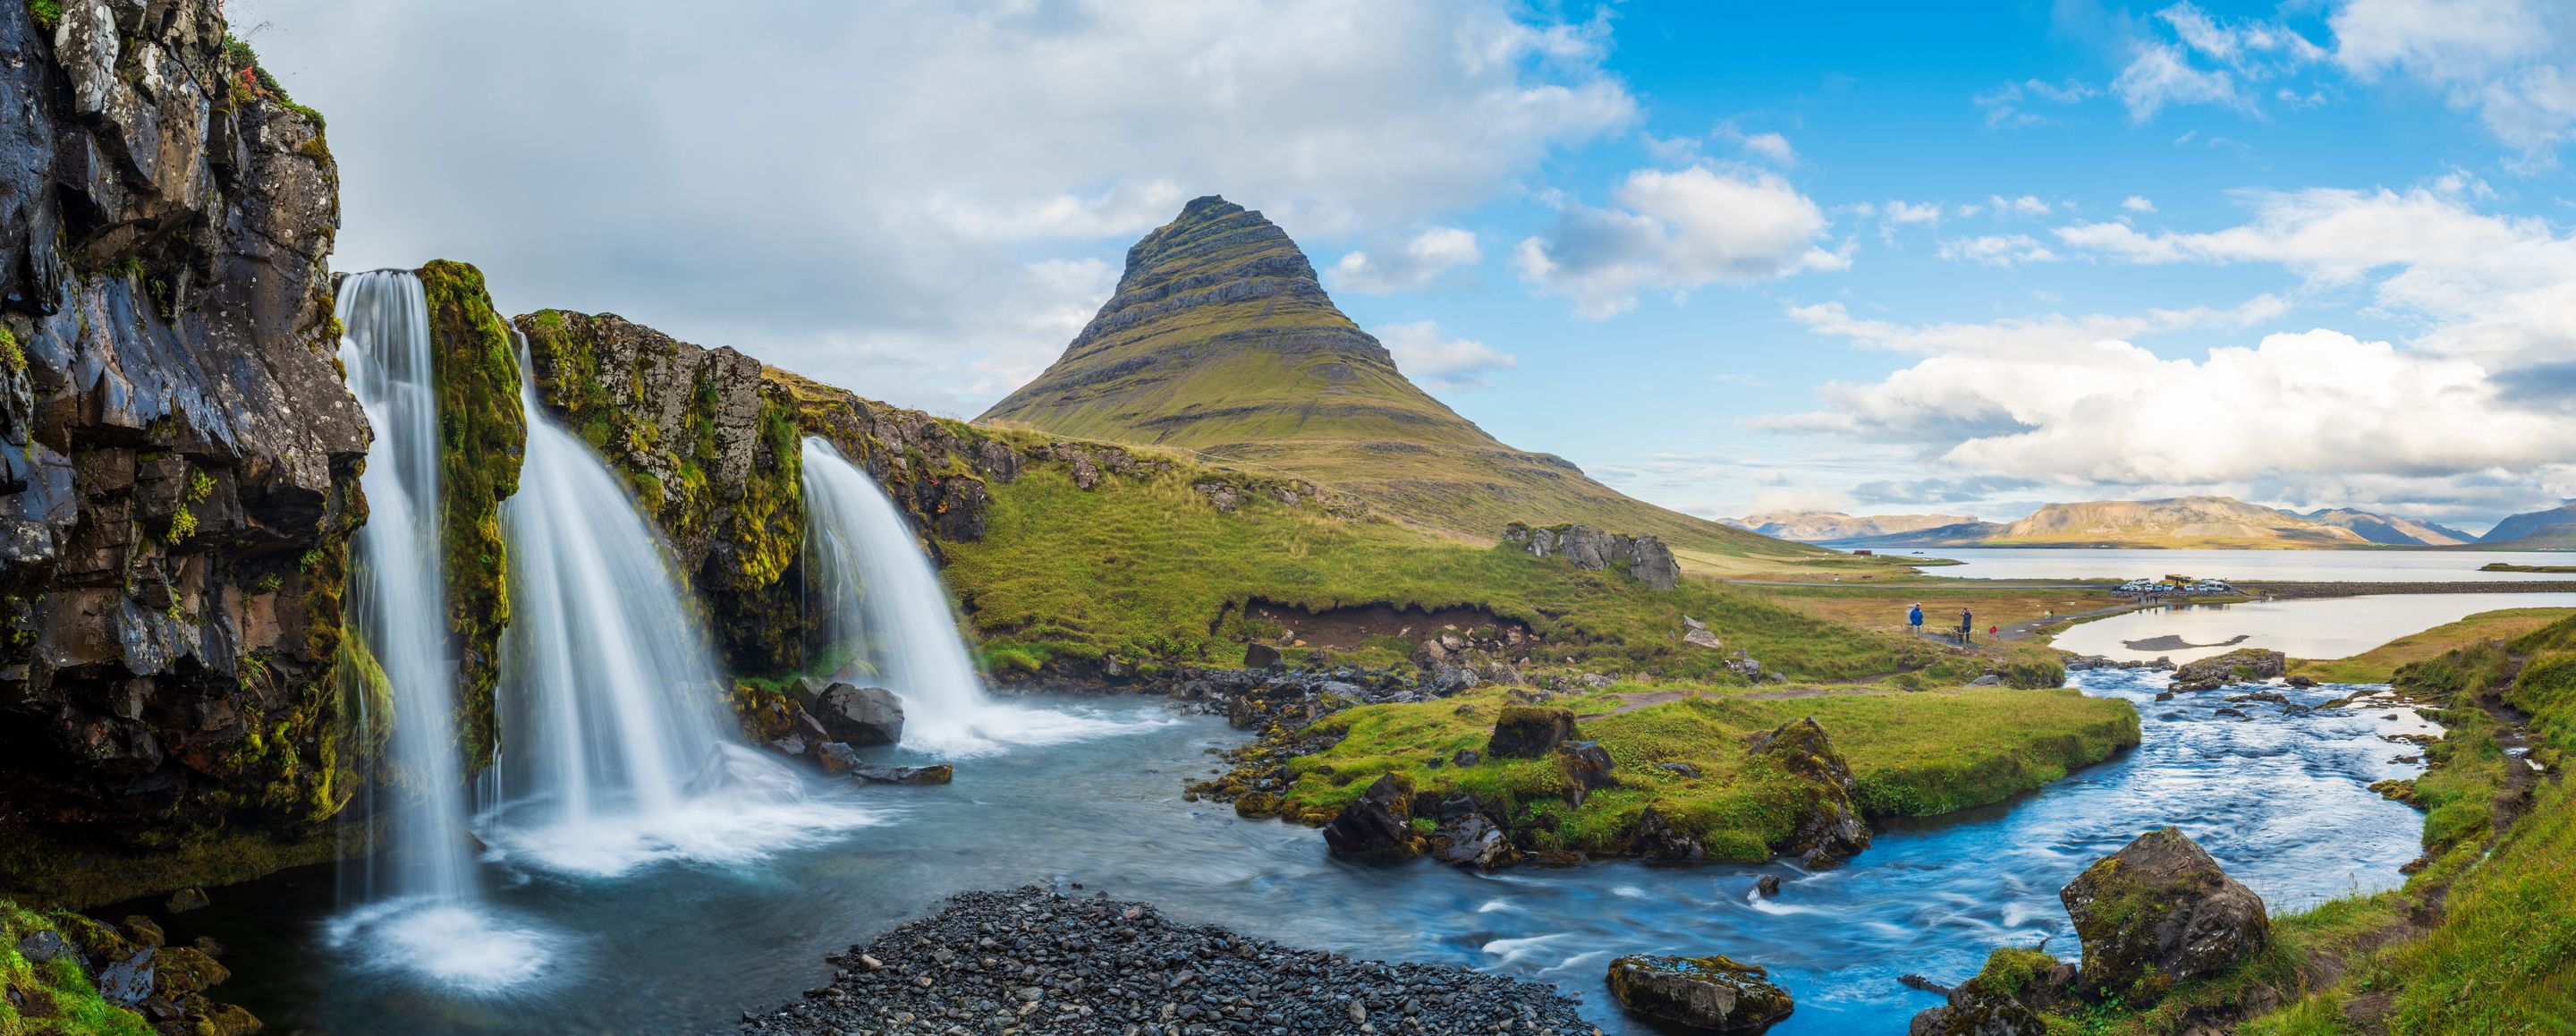 mt kirkjufell and kirkjufellsfoss waterfall in west iceland, most photographed mountain in north shore